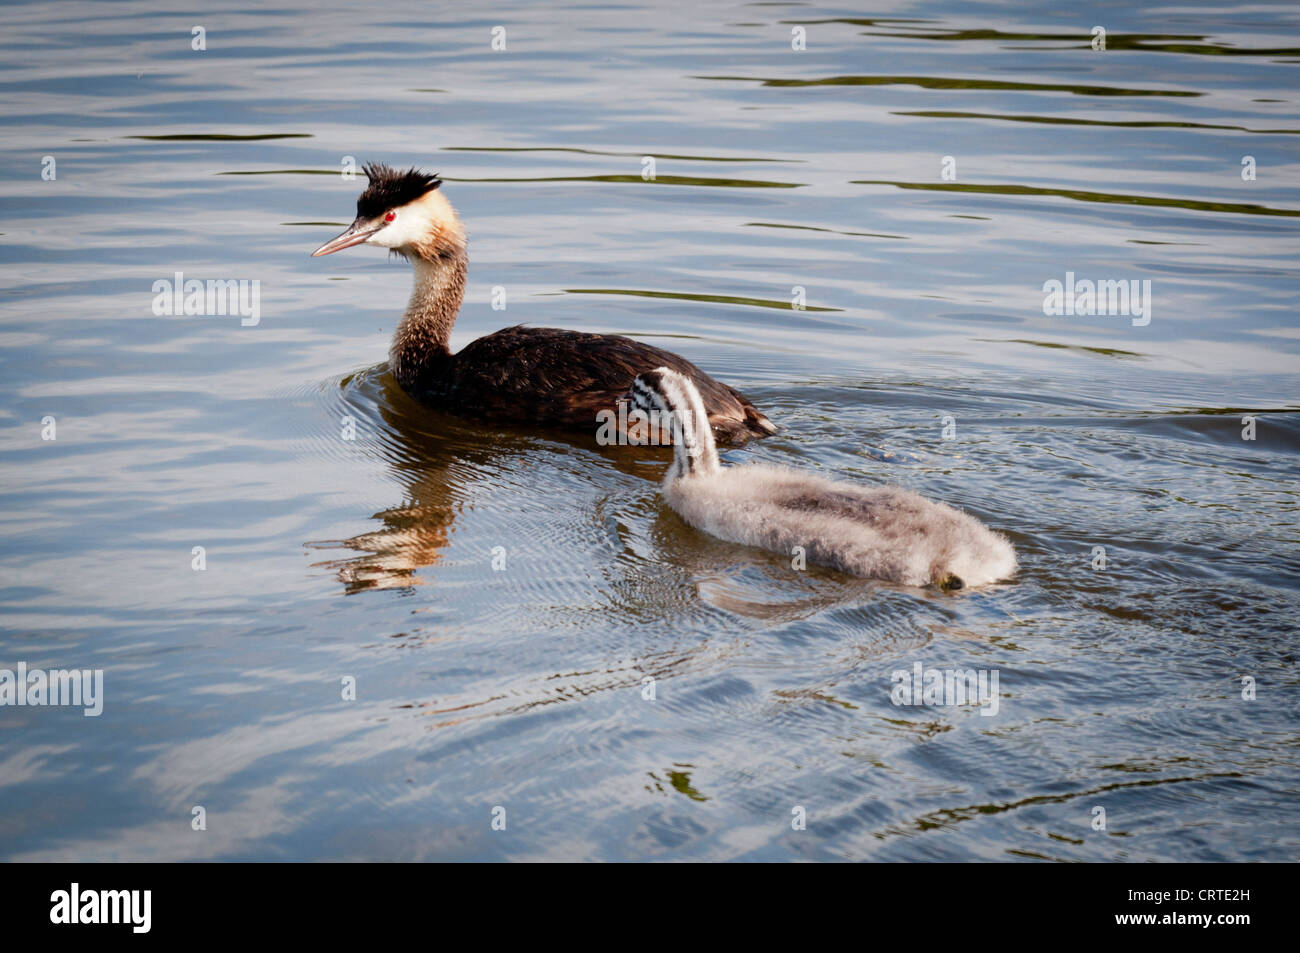 Adult and juvenile Great Crested Grebe (Podiceps cristatus) Stock Photo